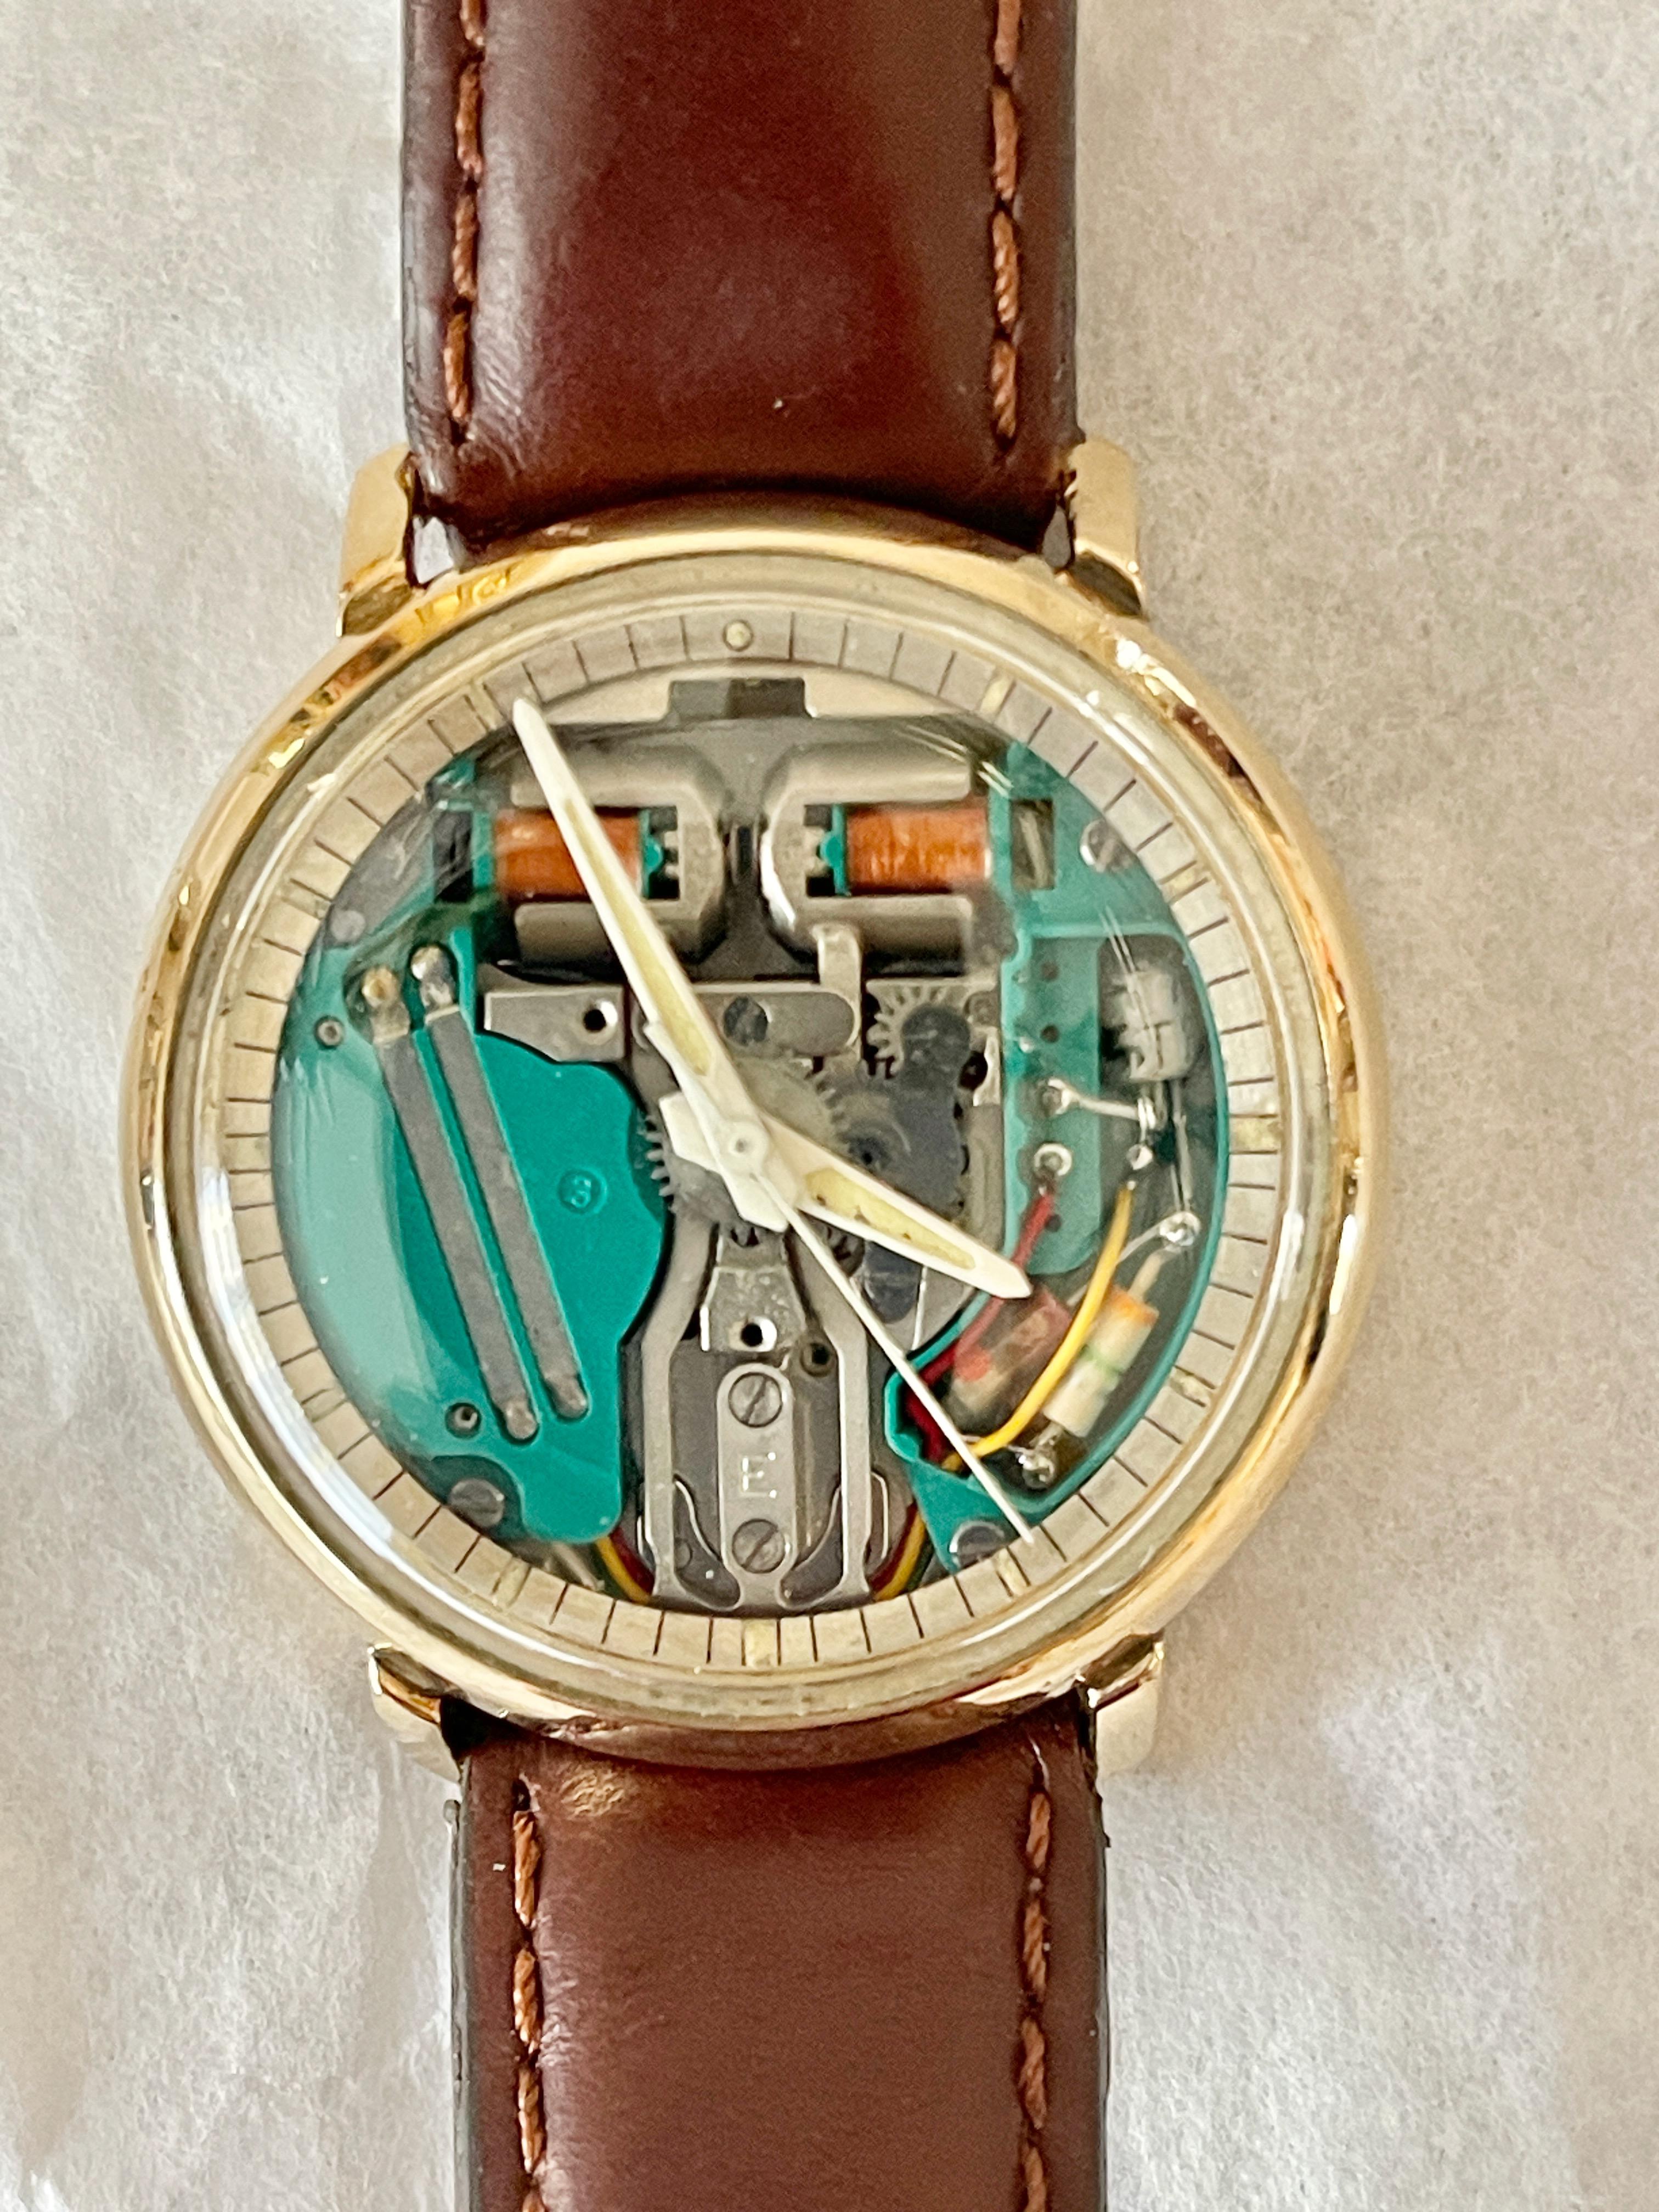 Bulova 214 Accutron Spaceview men's watch featuring proprietary electrostatic movement.
Serial number J88896/M9 = 1969.
35 mm x 38 mm
Internal bezel ring, originally with luminous material for chapters, all second/minute hash marks on the bezel